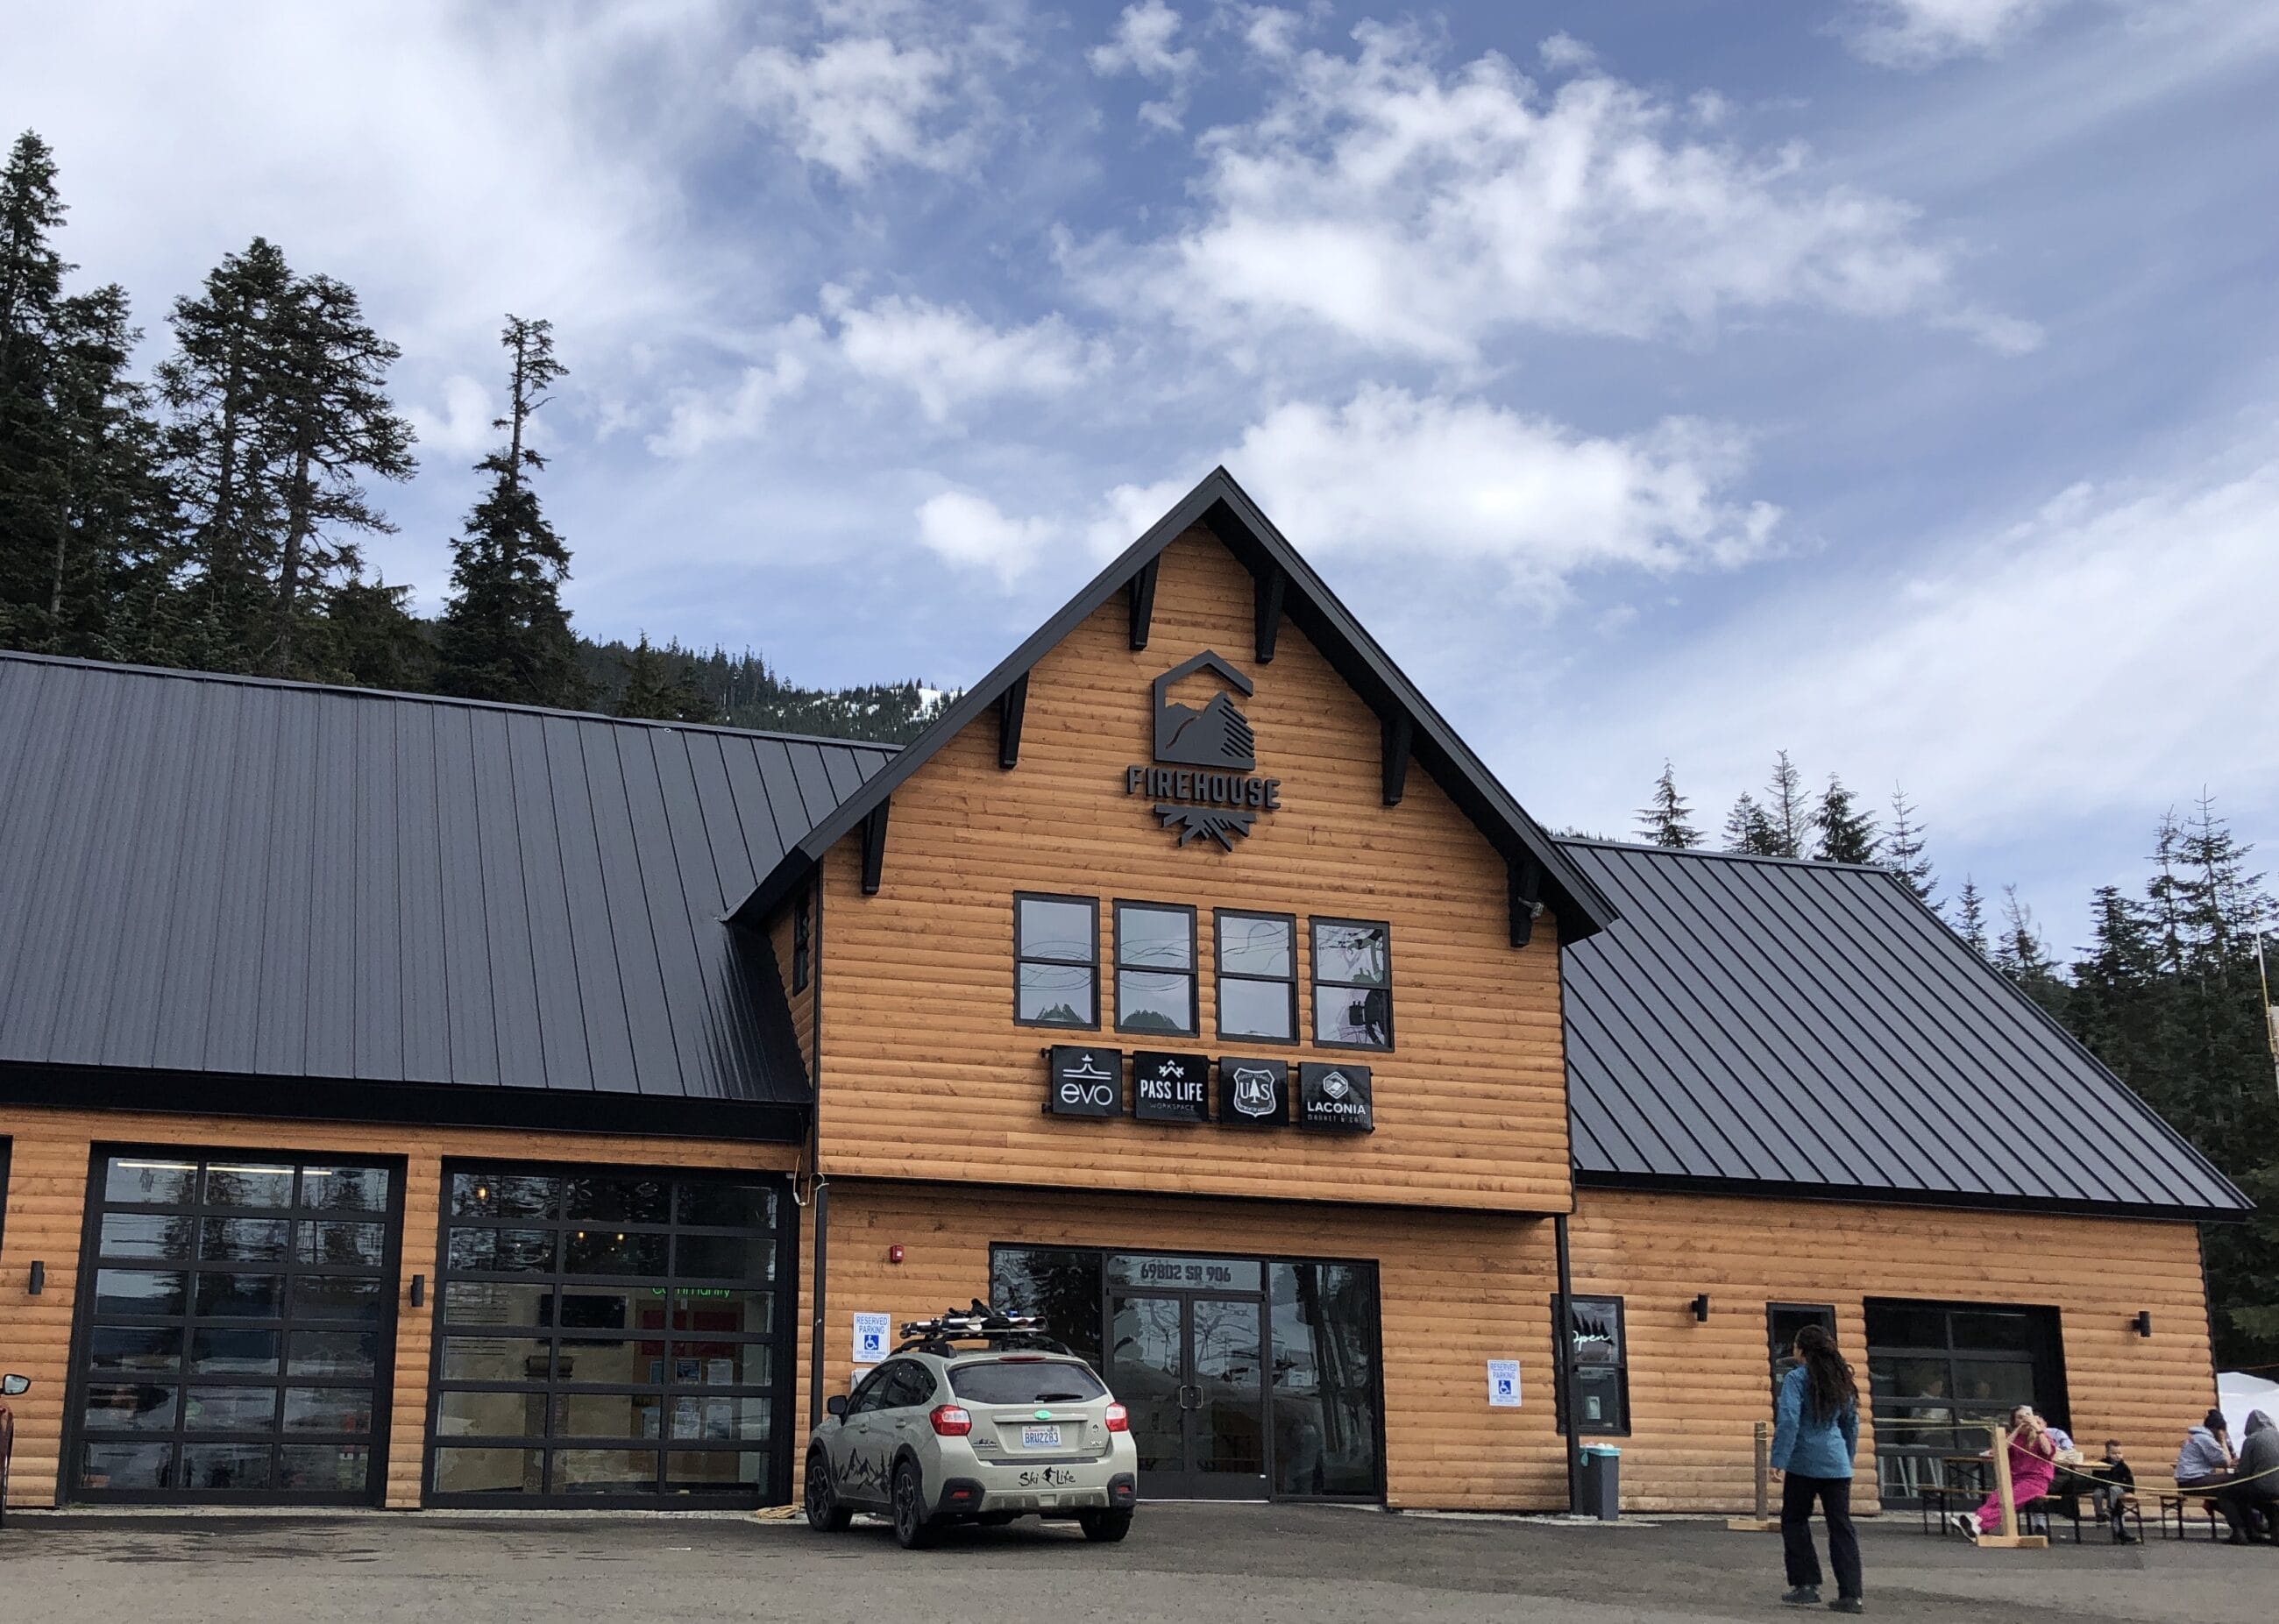 Snoqualmie Pass Visitor Station